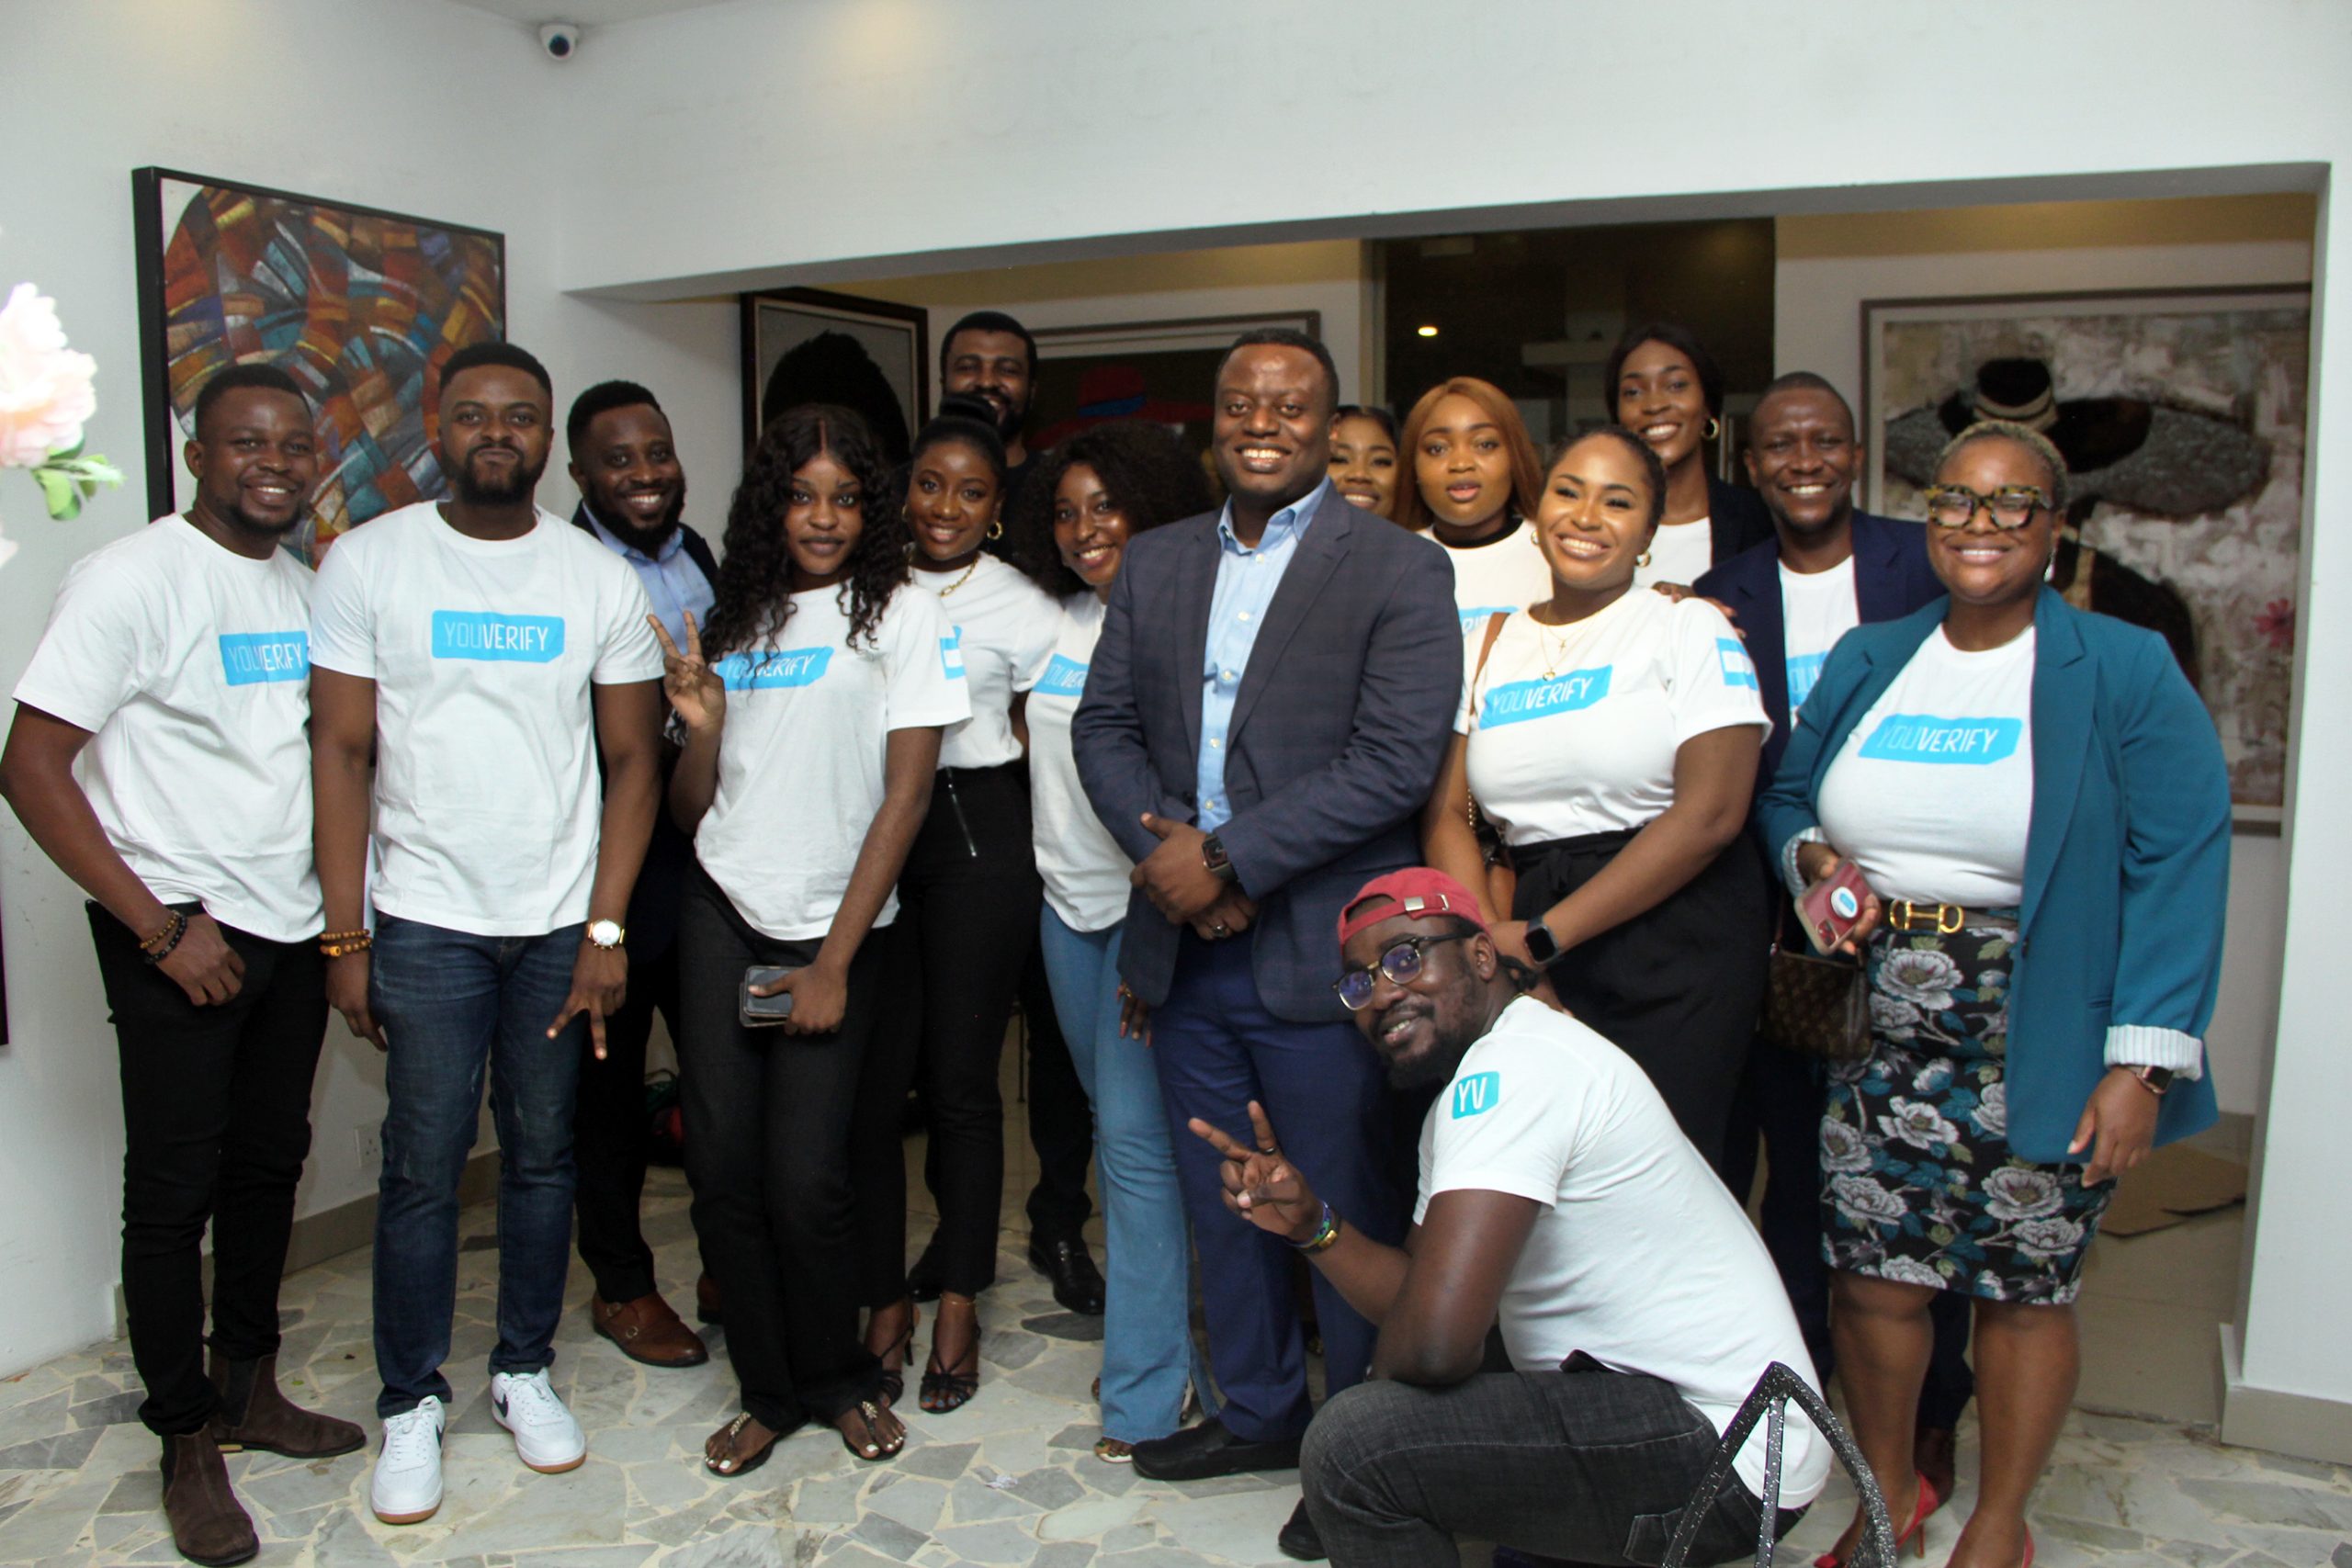 Nigerian Start-up YouVerify Launches in Kenya as it Expands Across Africa